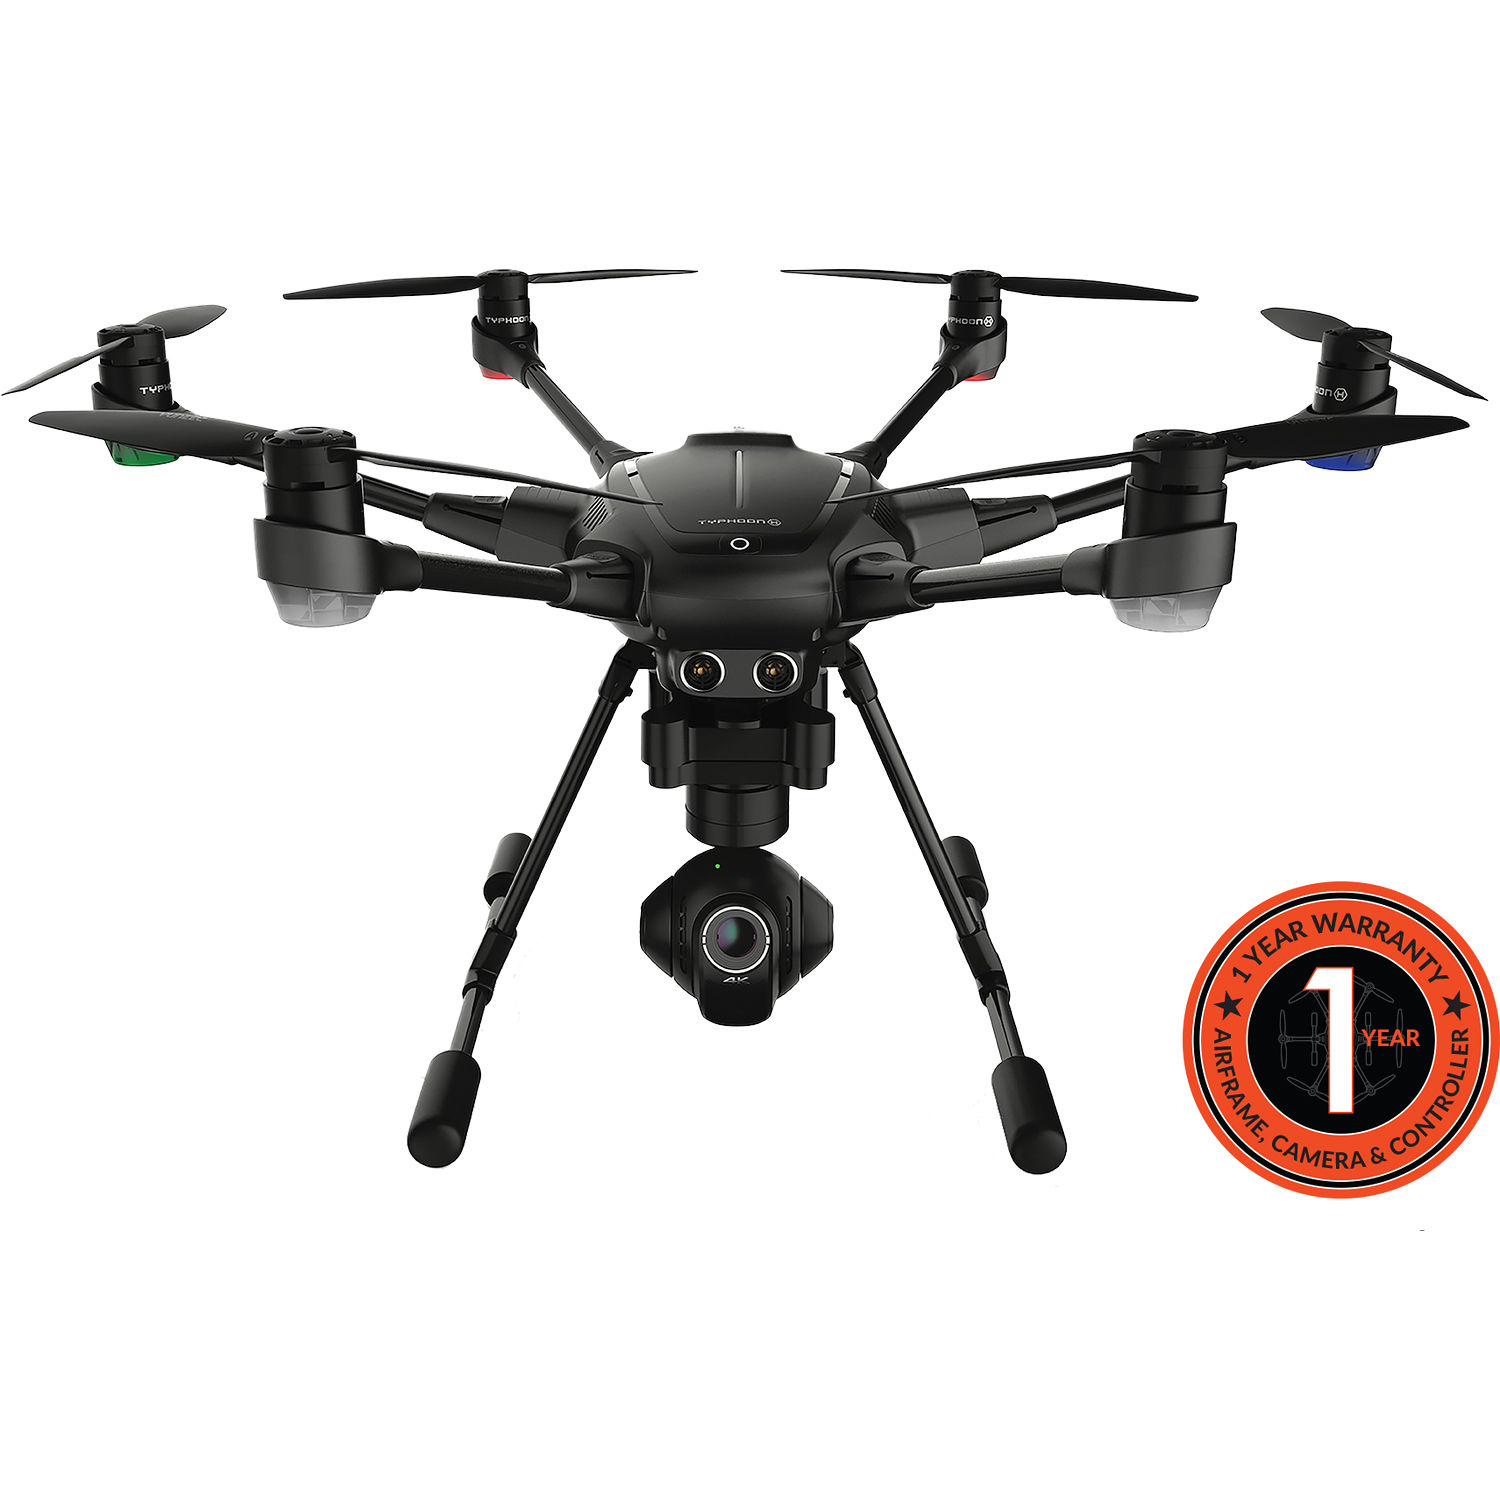 YUNEEC Typhoon H Hexacopter with Intel RealSense, GCO3+ 4K Camera, Wizard Wand, and Backpack